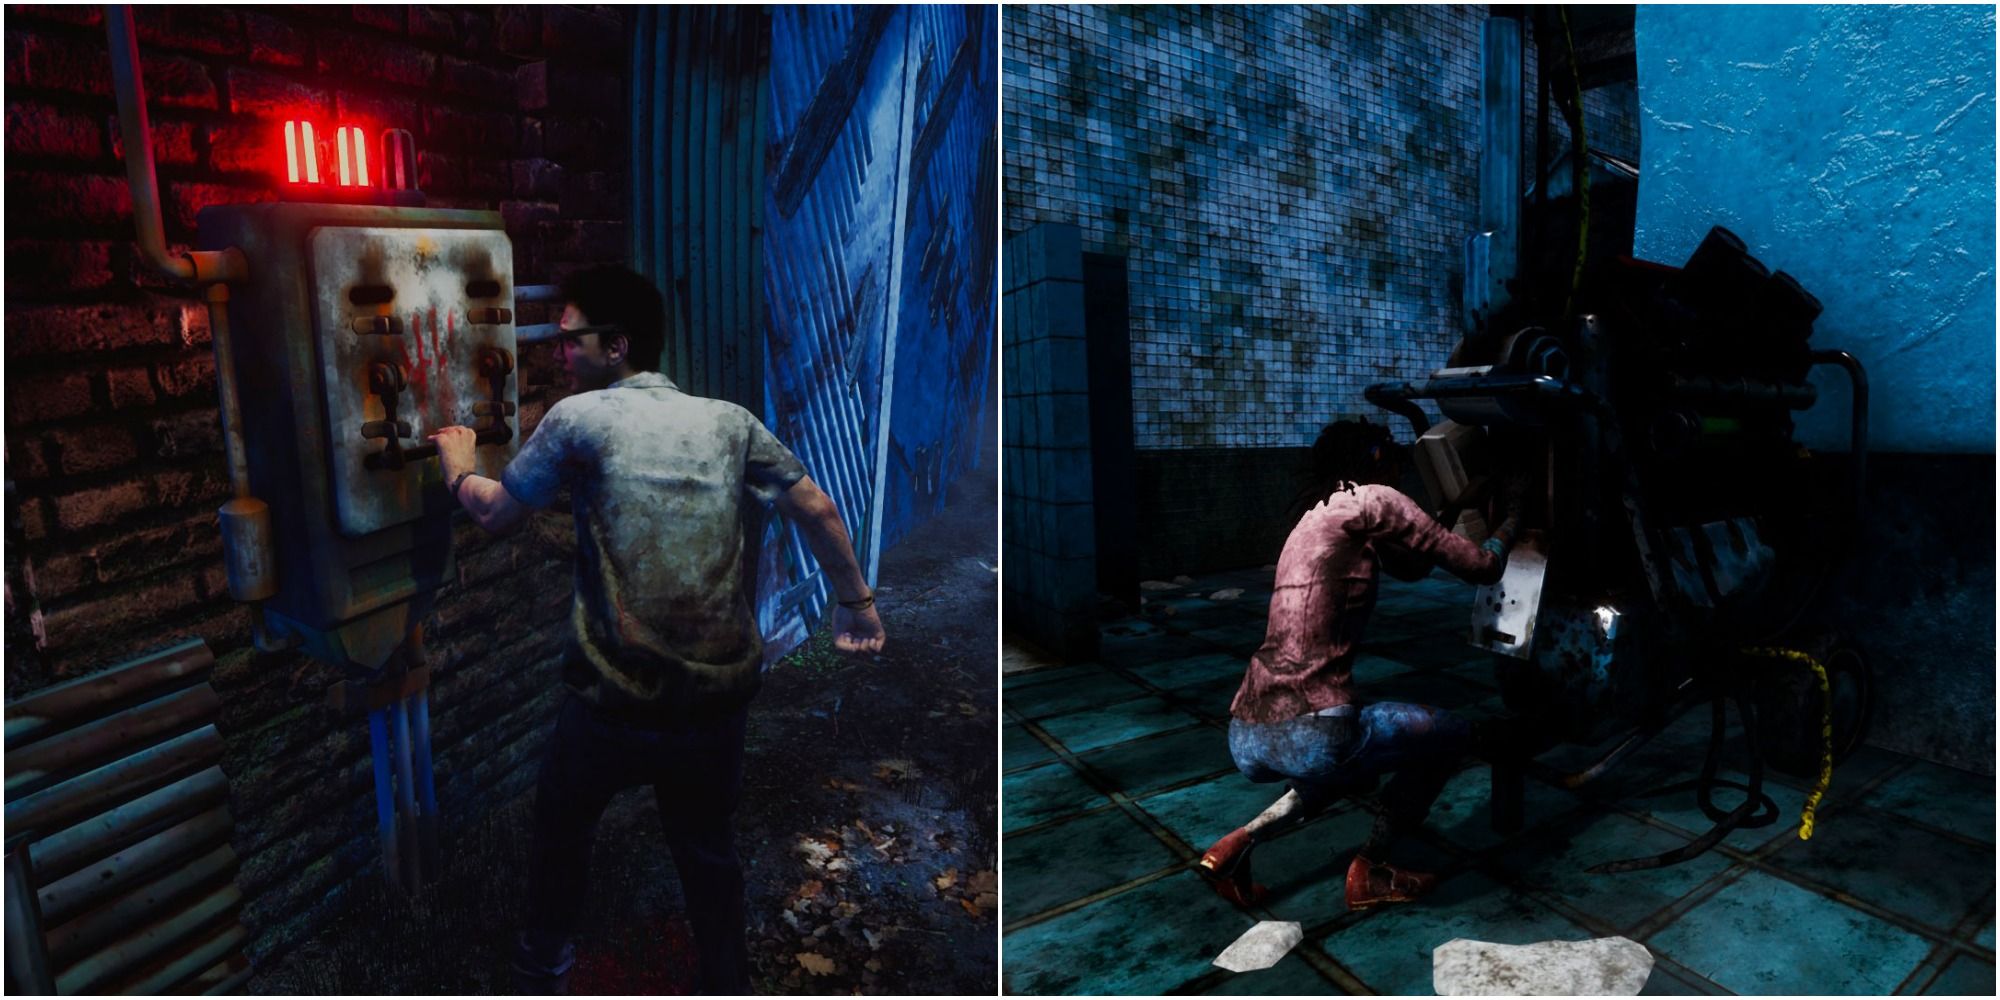 Dwight Fairfield and Claudette Morel working together to escape a trial in Dead By Daylight